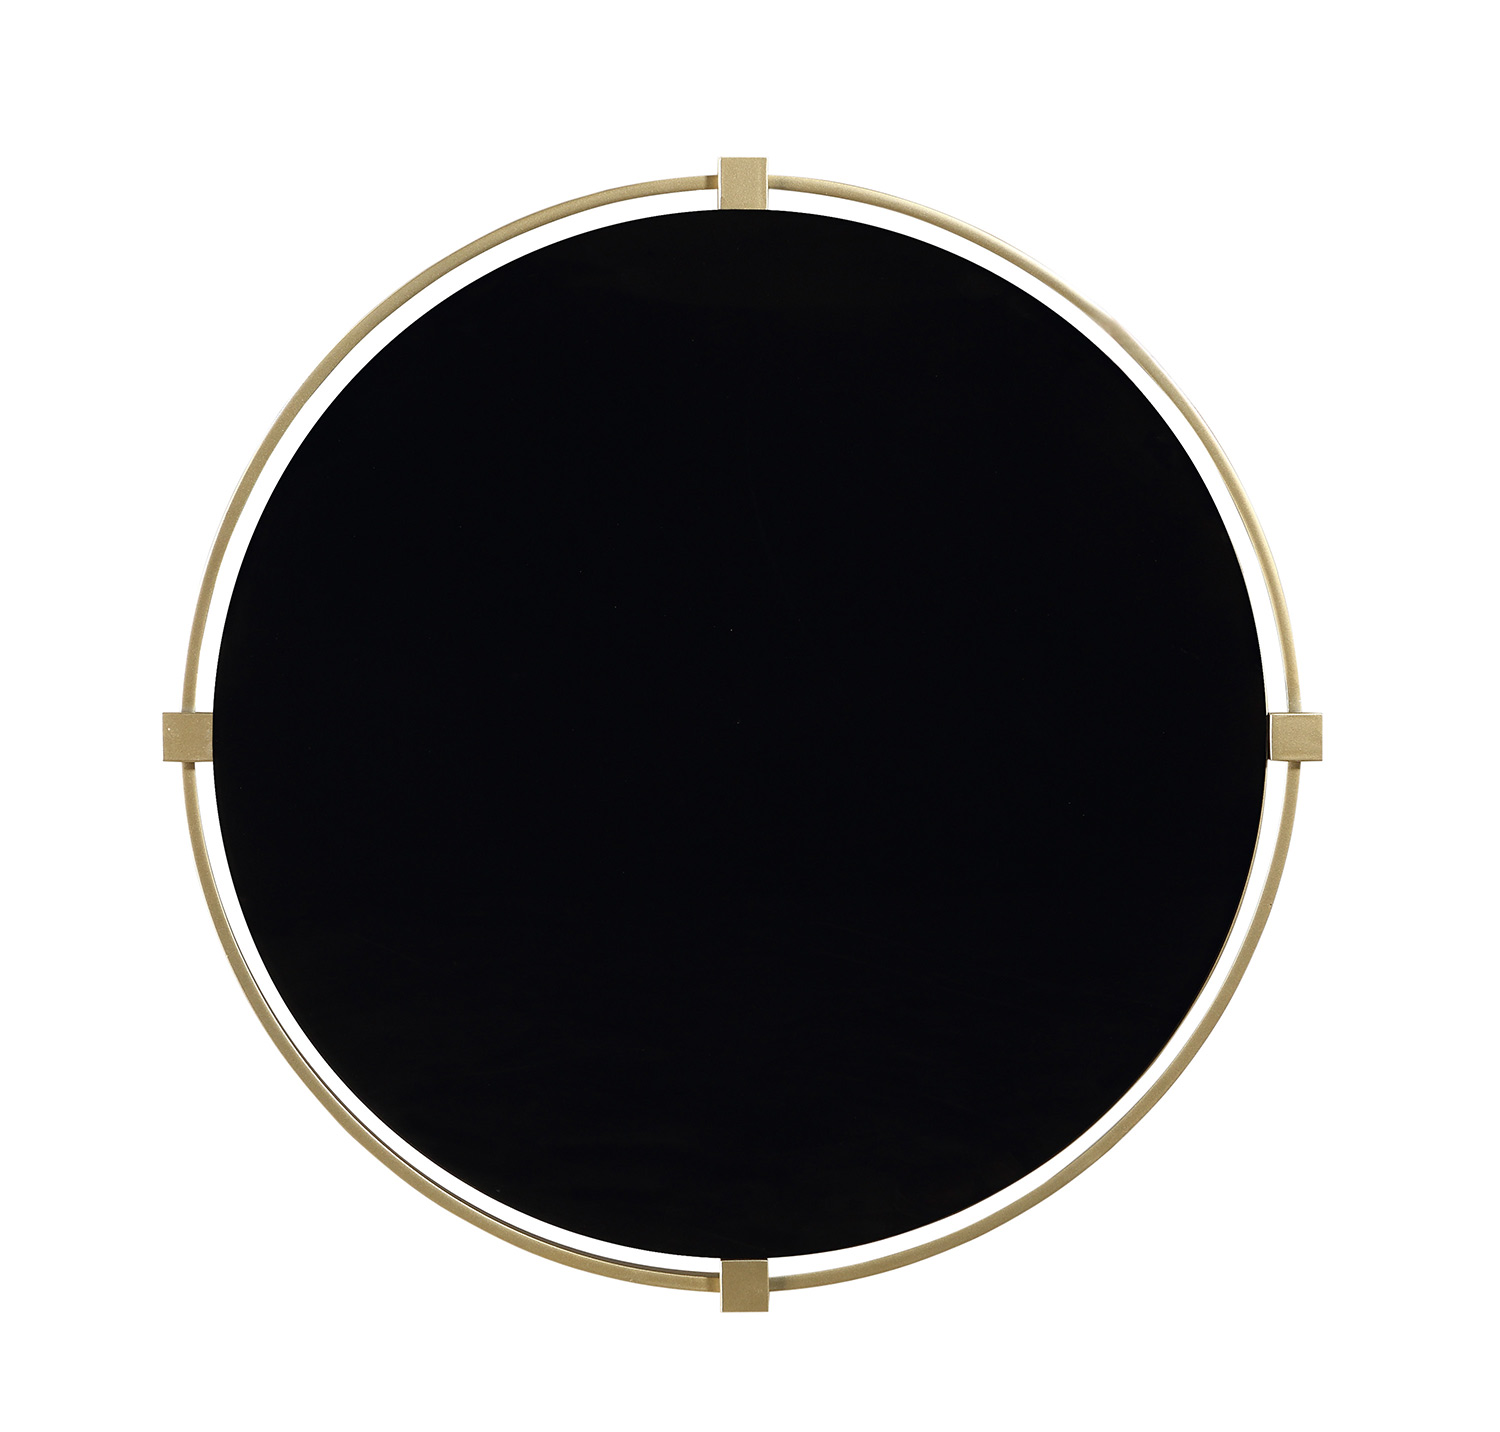 Homelegance Caracal Round Cocktail Table with Black Glass Insert - Gold